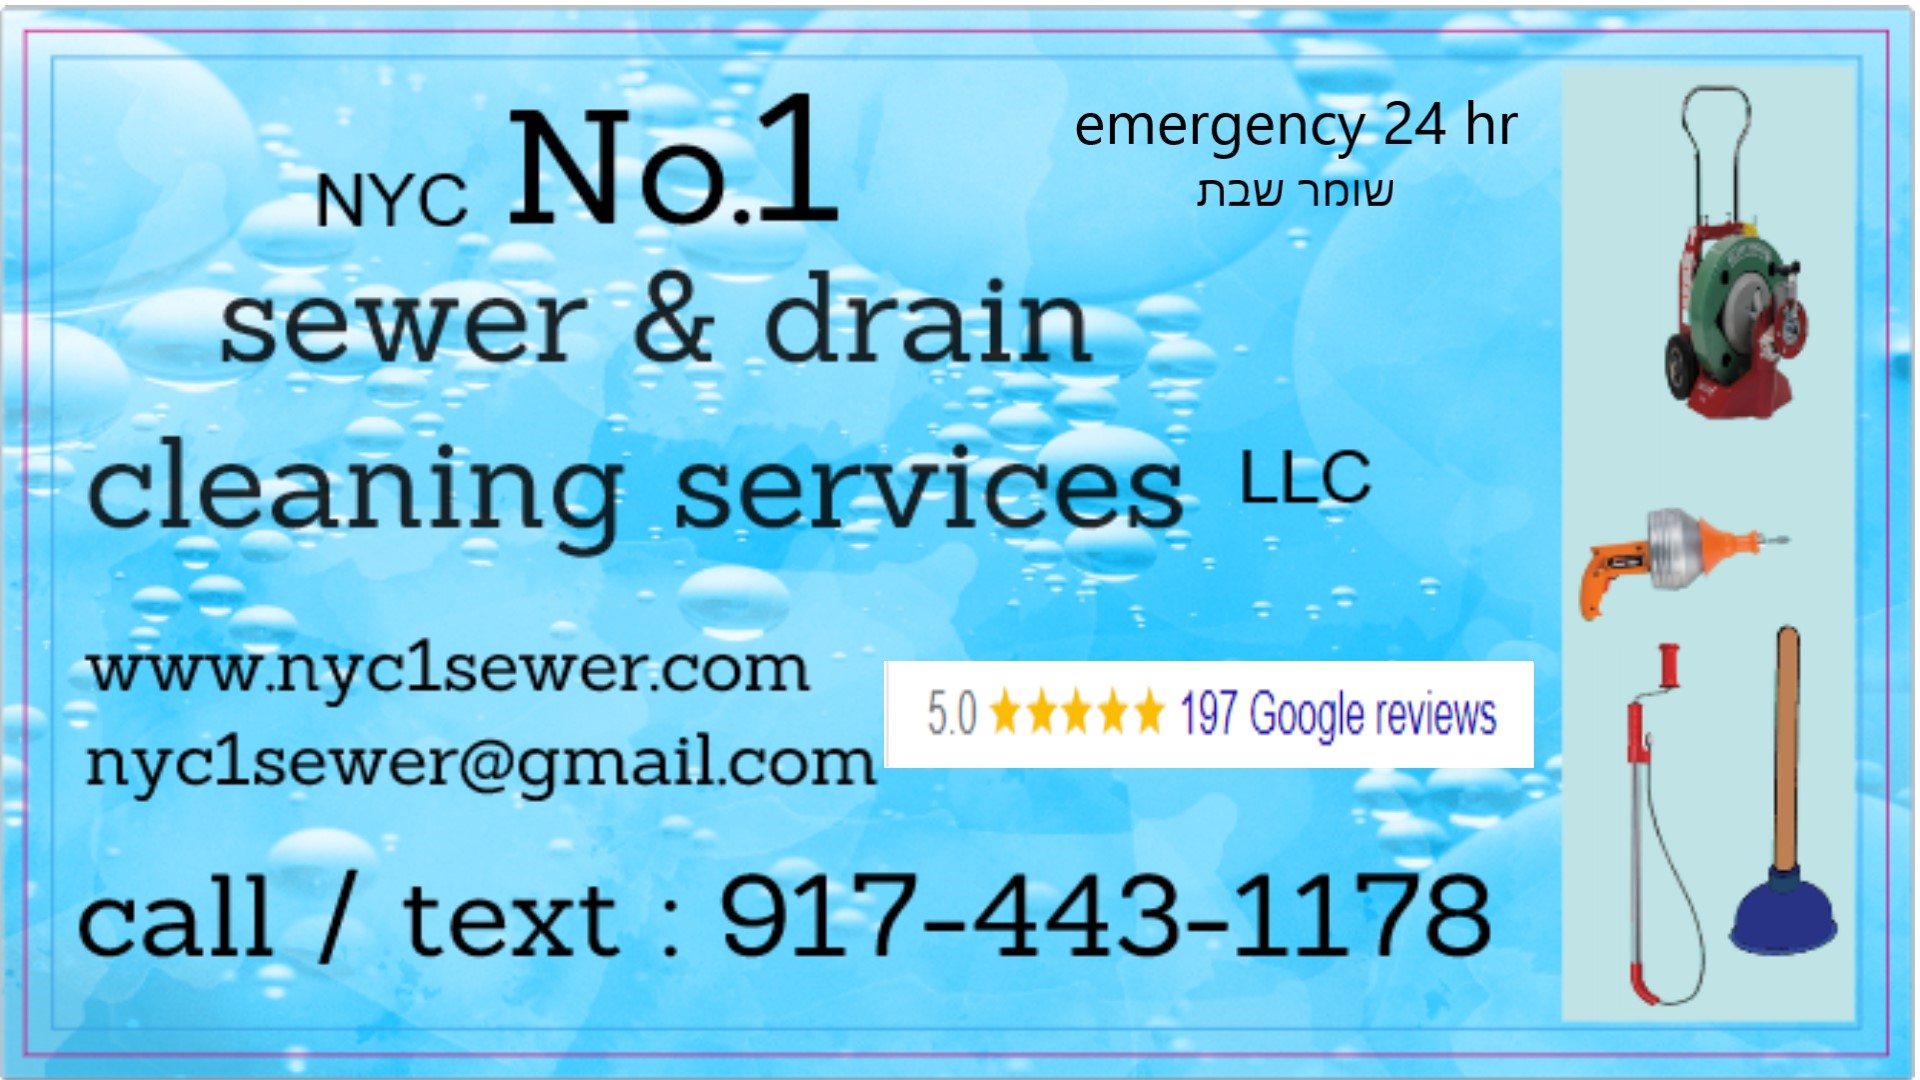 No.1 Sewer & drain cleaning service llc | 1420 Ocean Pkwy #2b, Brooklyn, NY 11230, United States | Phone: (917) 443-1178